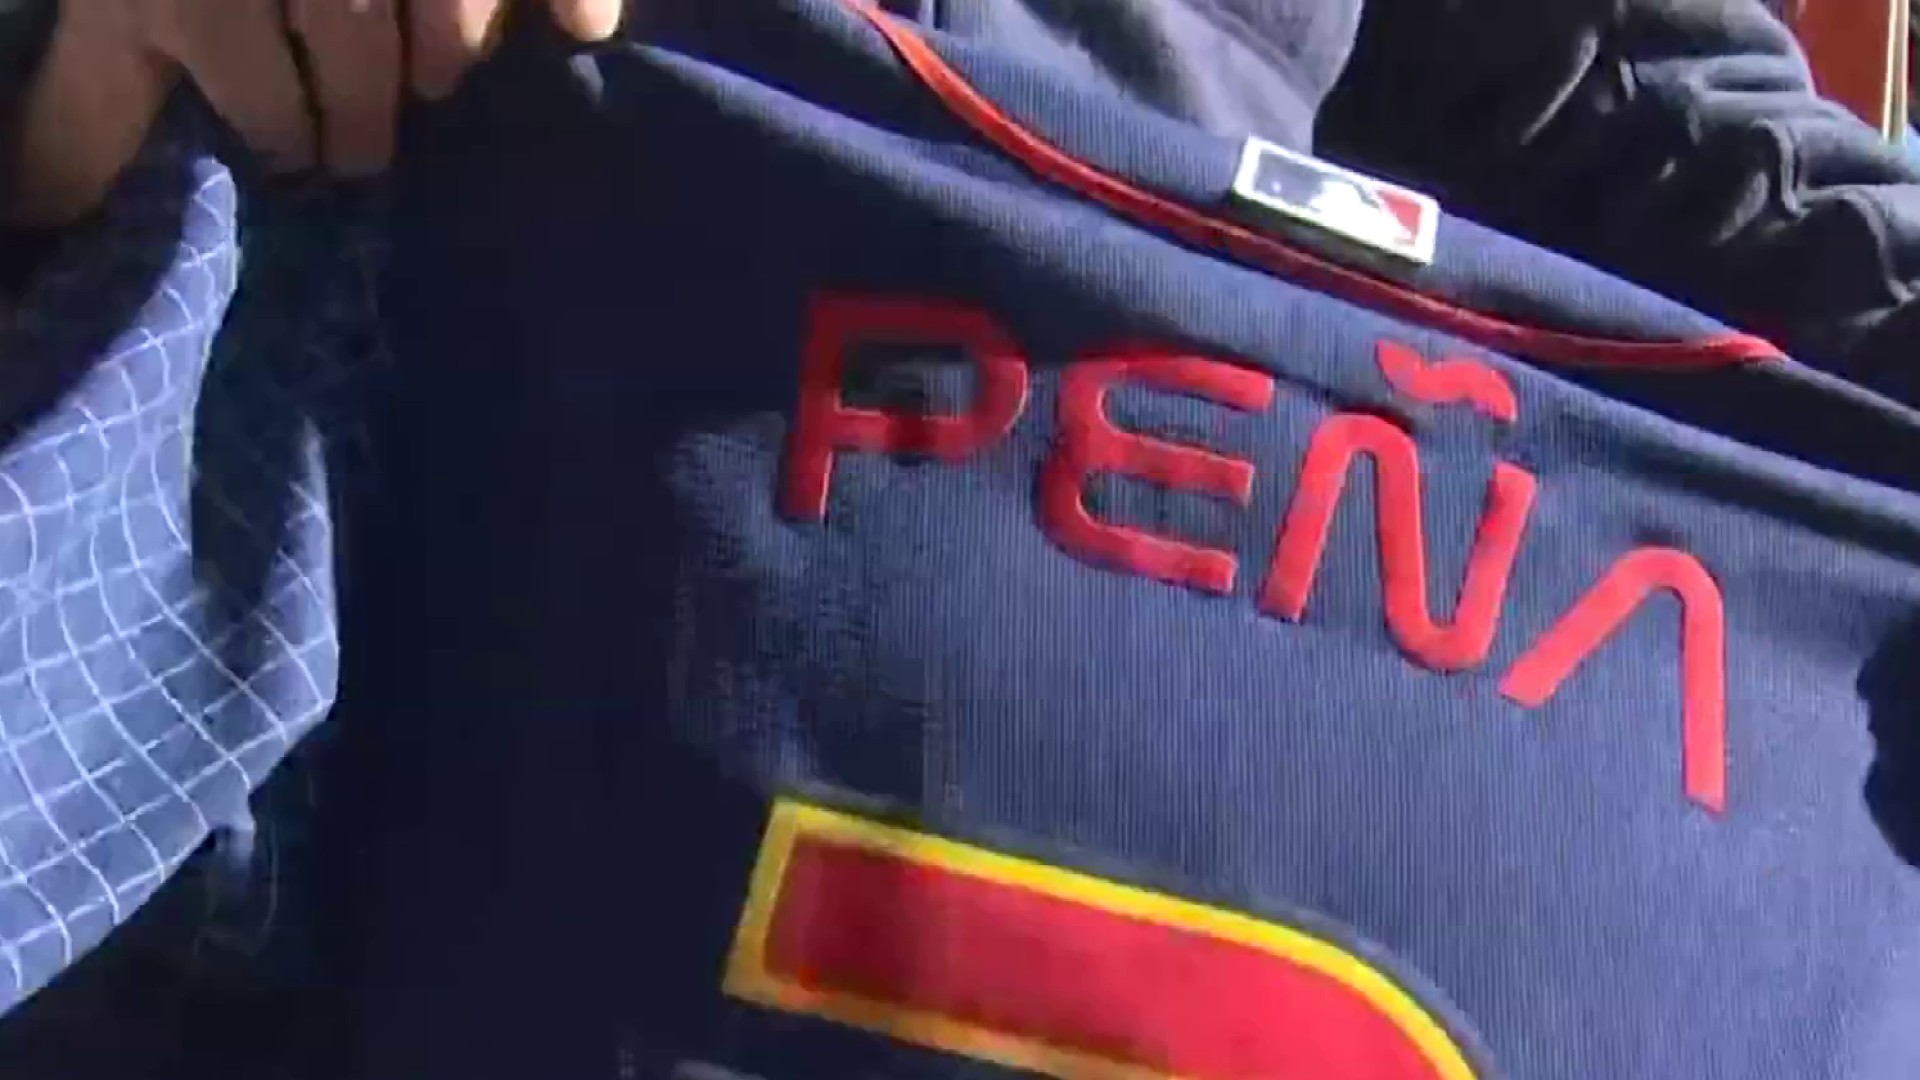 Jeremy Peña jersey in high demand for this holiday season